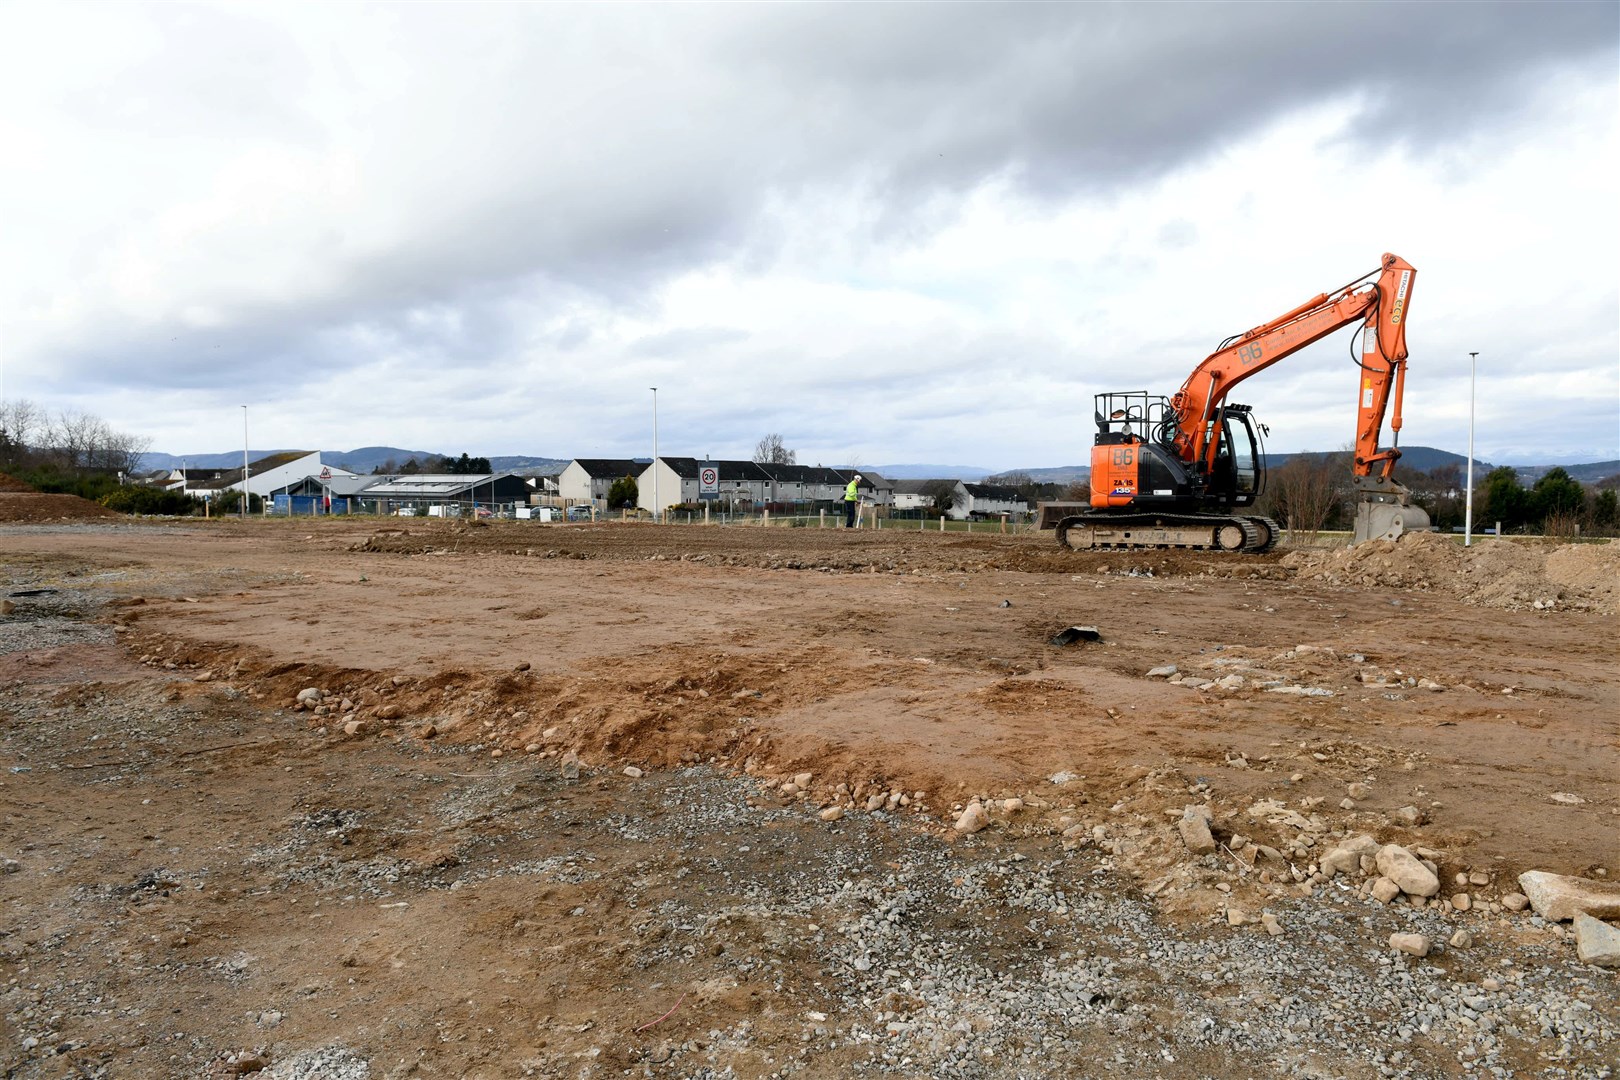 Construction work started on the Haven Centre at a site in Smithton in March.